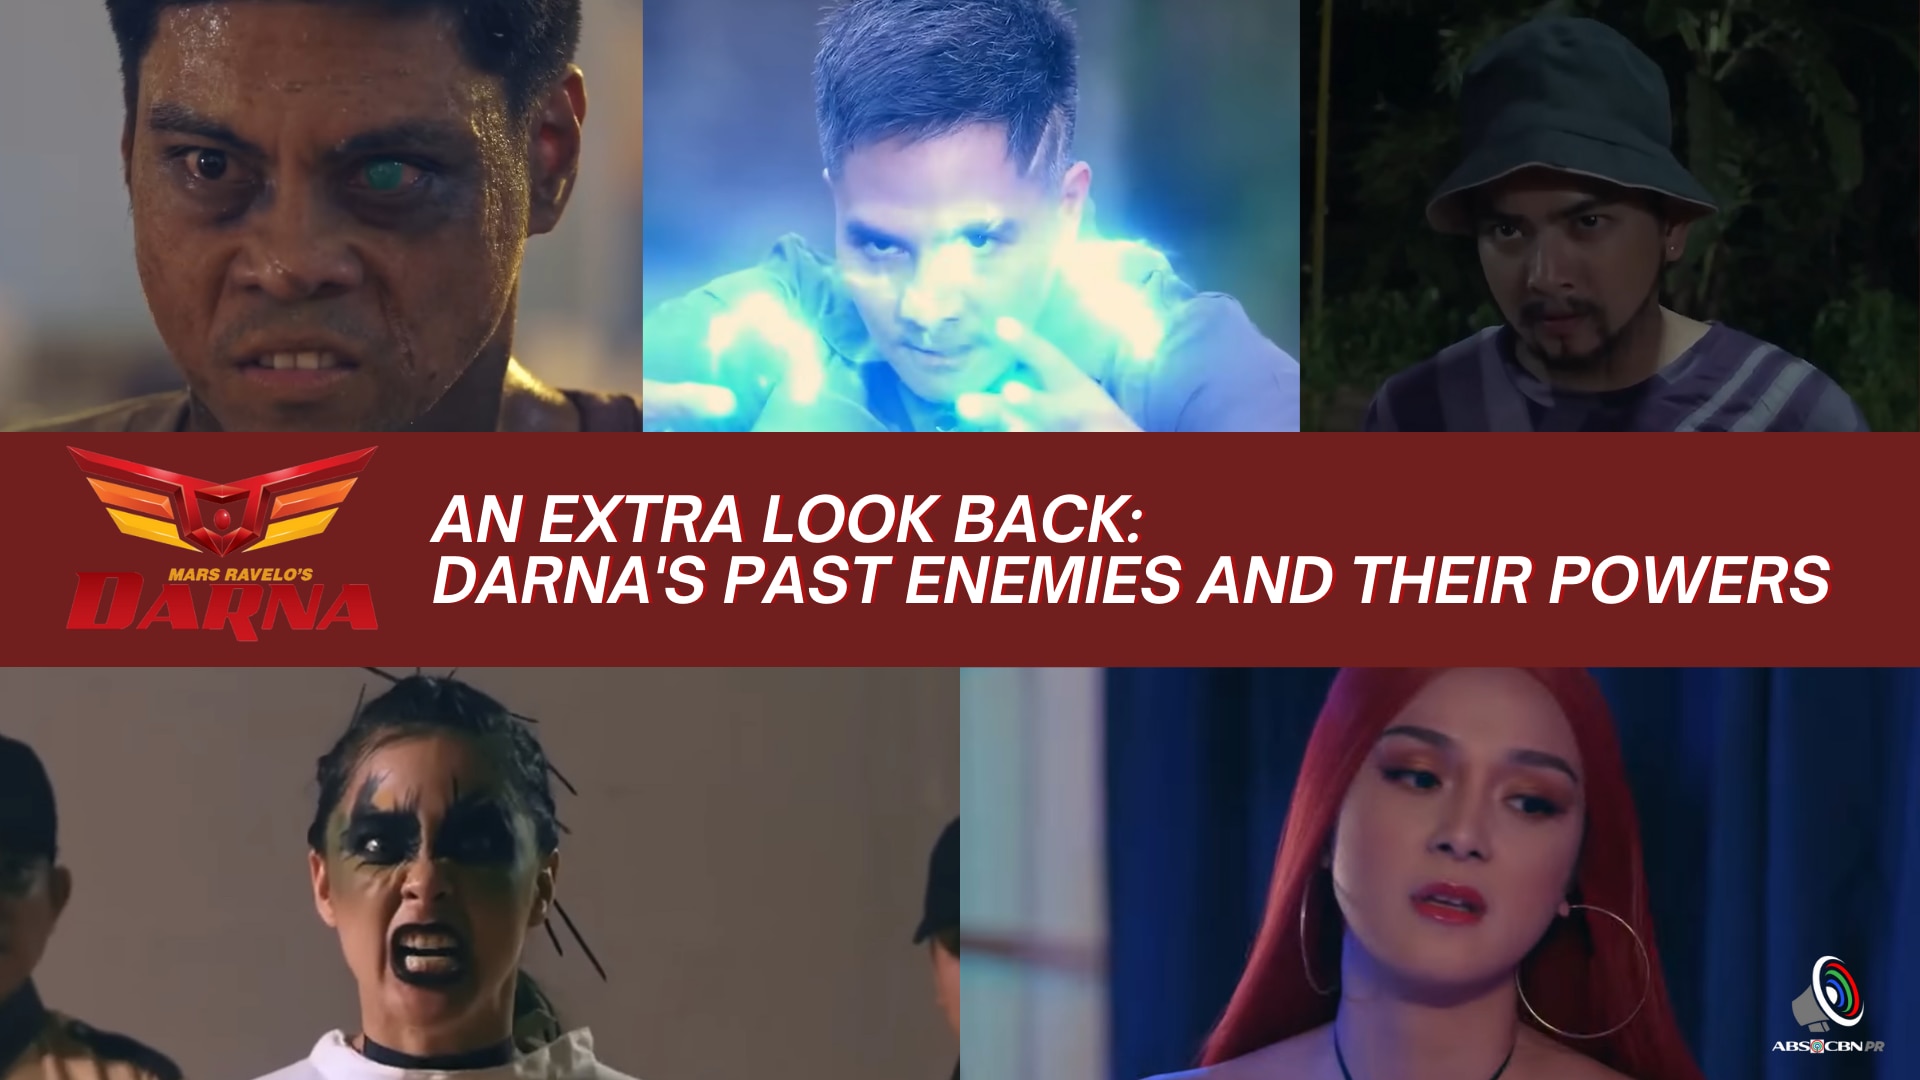 An Extra Look Back: Darna's past enemies and their powers